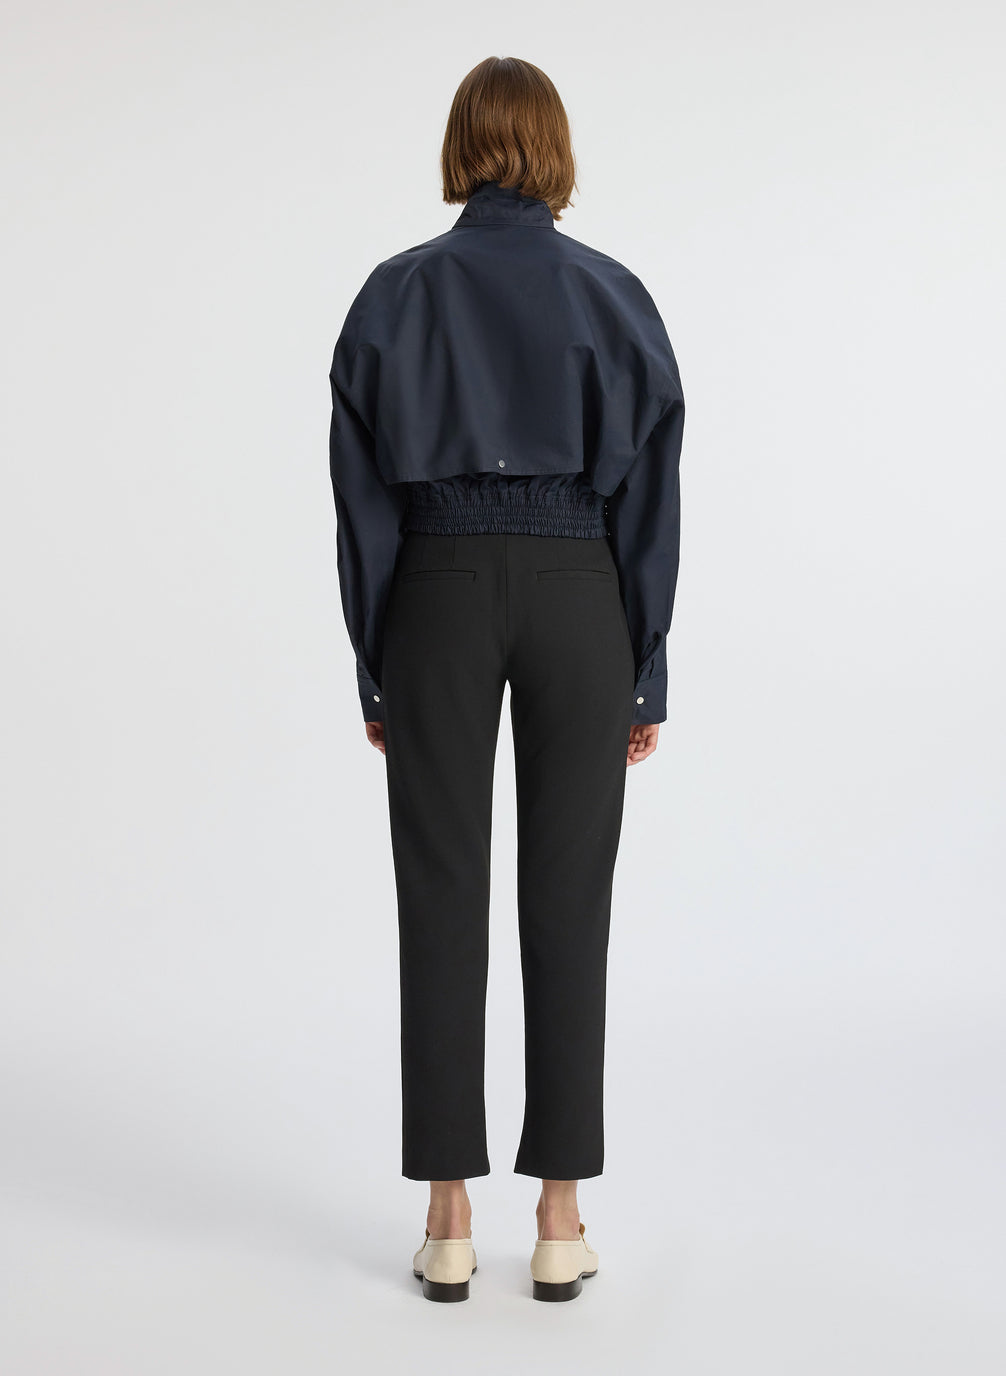 back  view of woman in navy blue jacket and black ankle pants